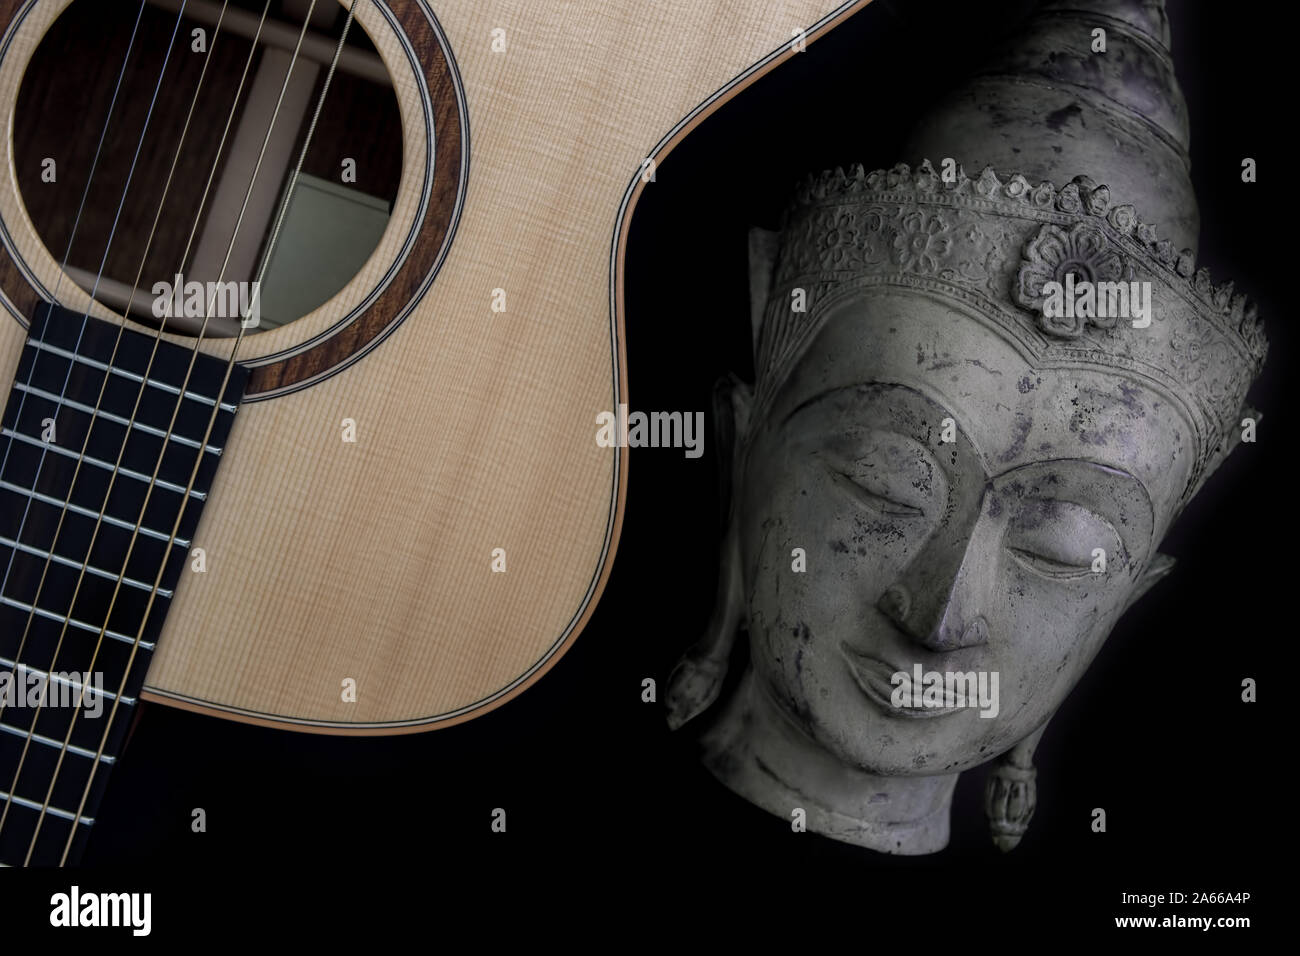 Spiritual music. Traditional meditating buddha statue with acoustic folk guitar. Representing music therapy, religious music and healing the mind. Chi Stock Photo